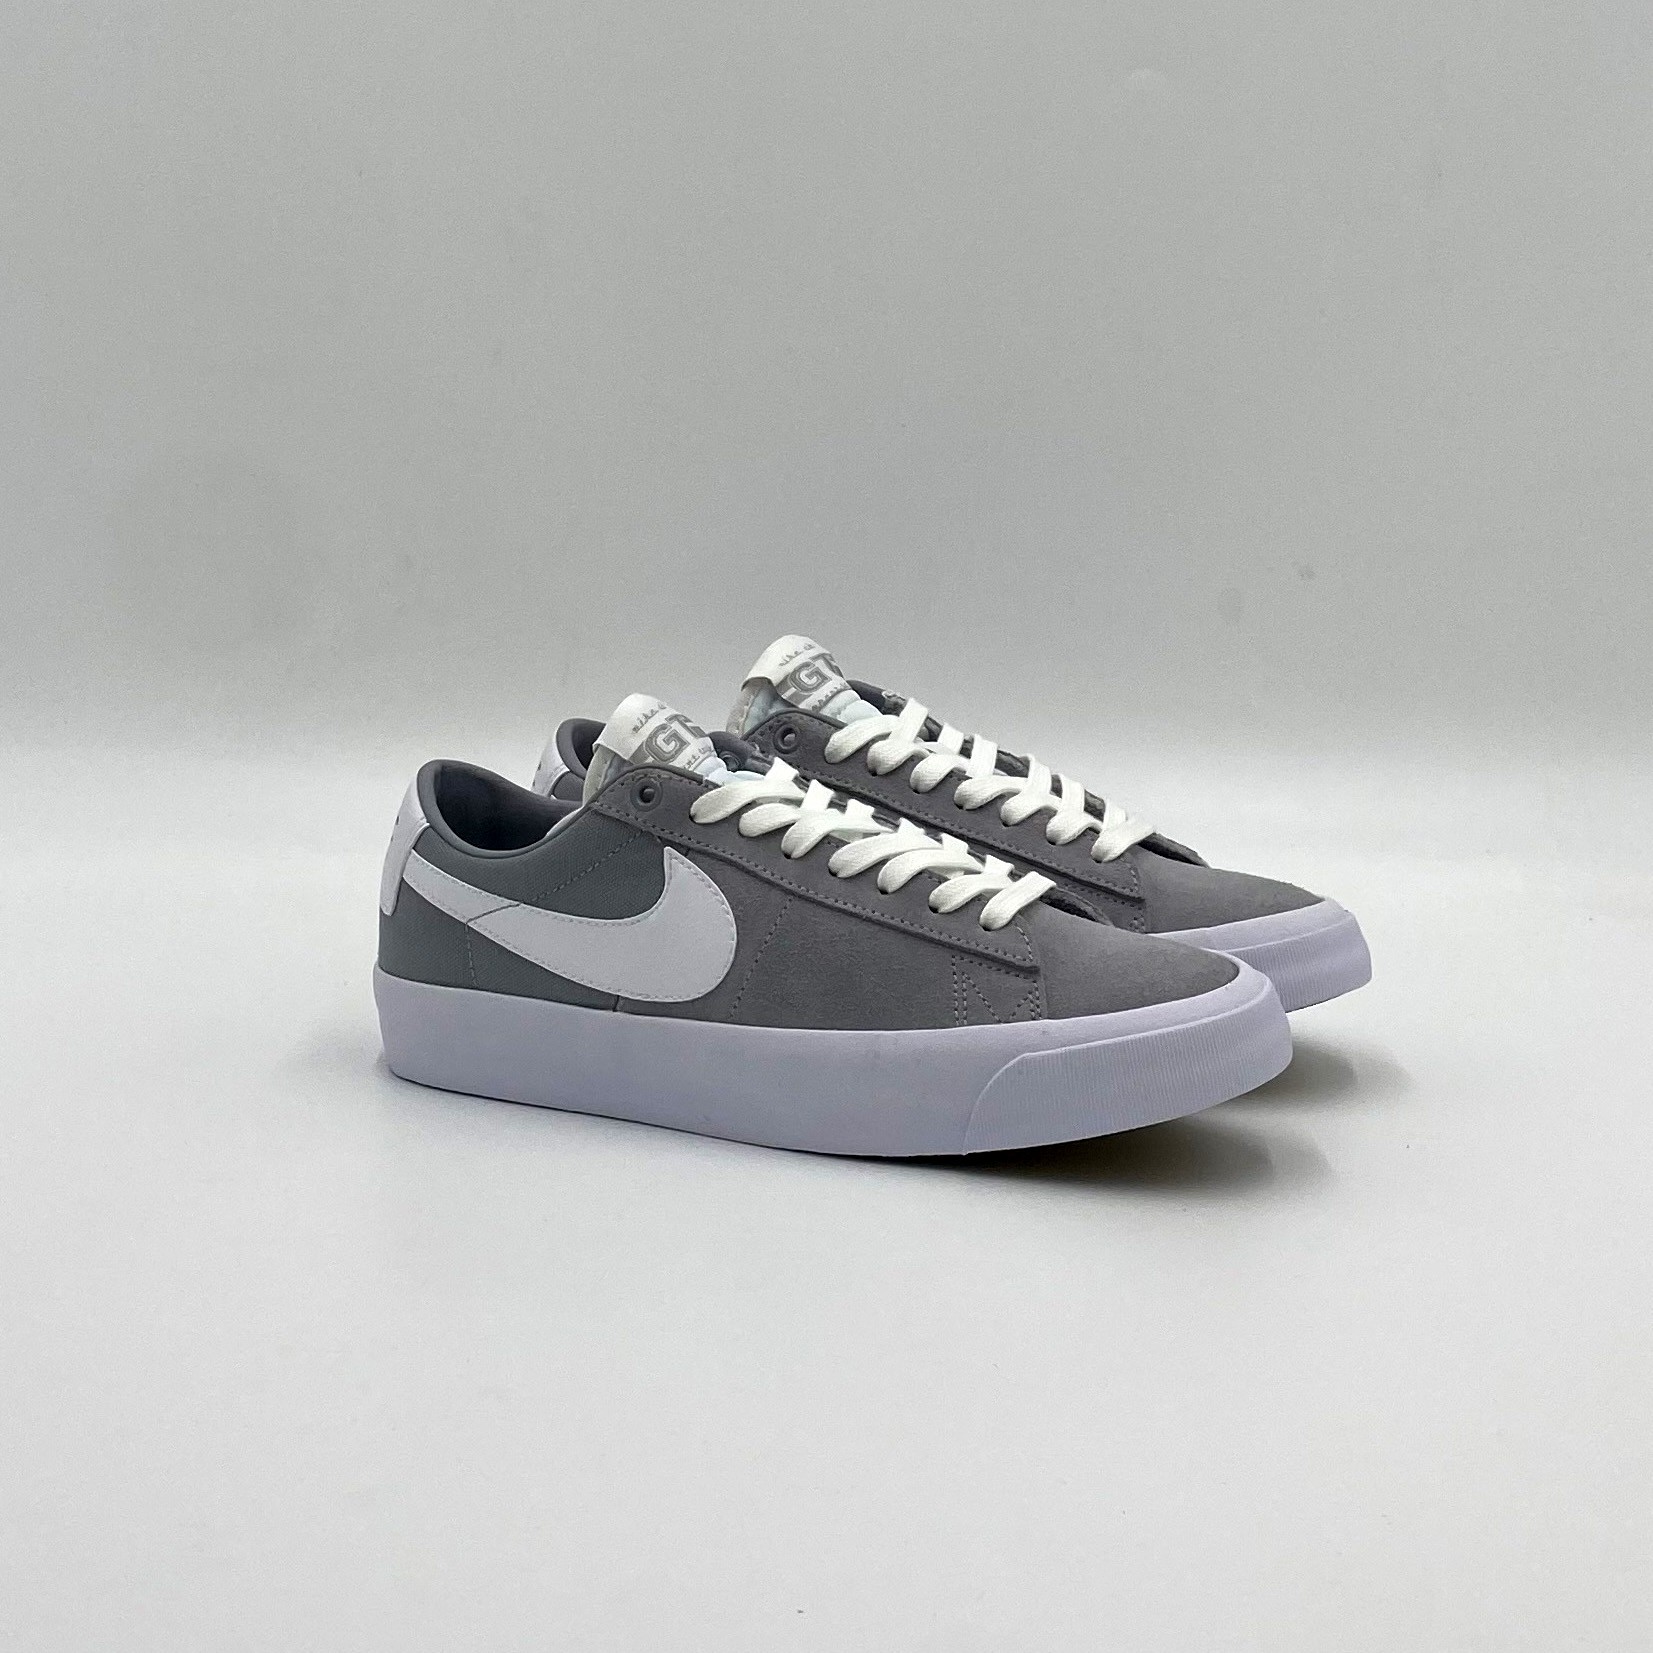 mimar Acostumbrarse a diferencia Nike SB Zoom Blazer Low Pro GT (Wolf Grey/White) Shoes Mens at Emage  Colorado, LLC